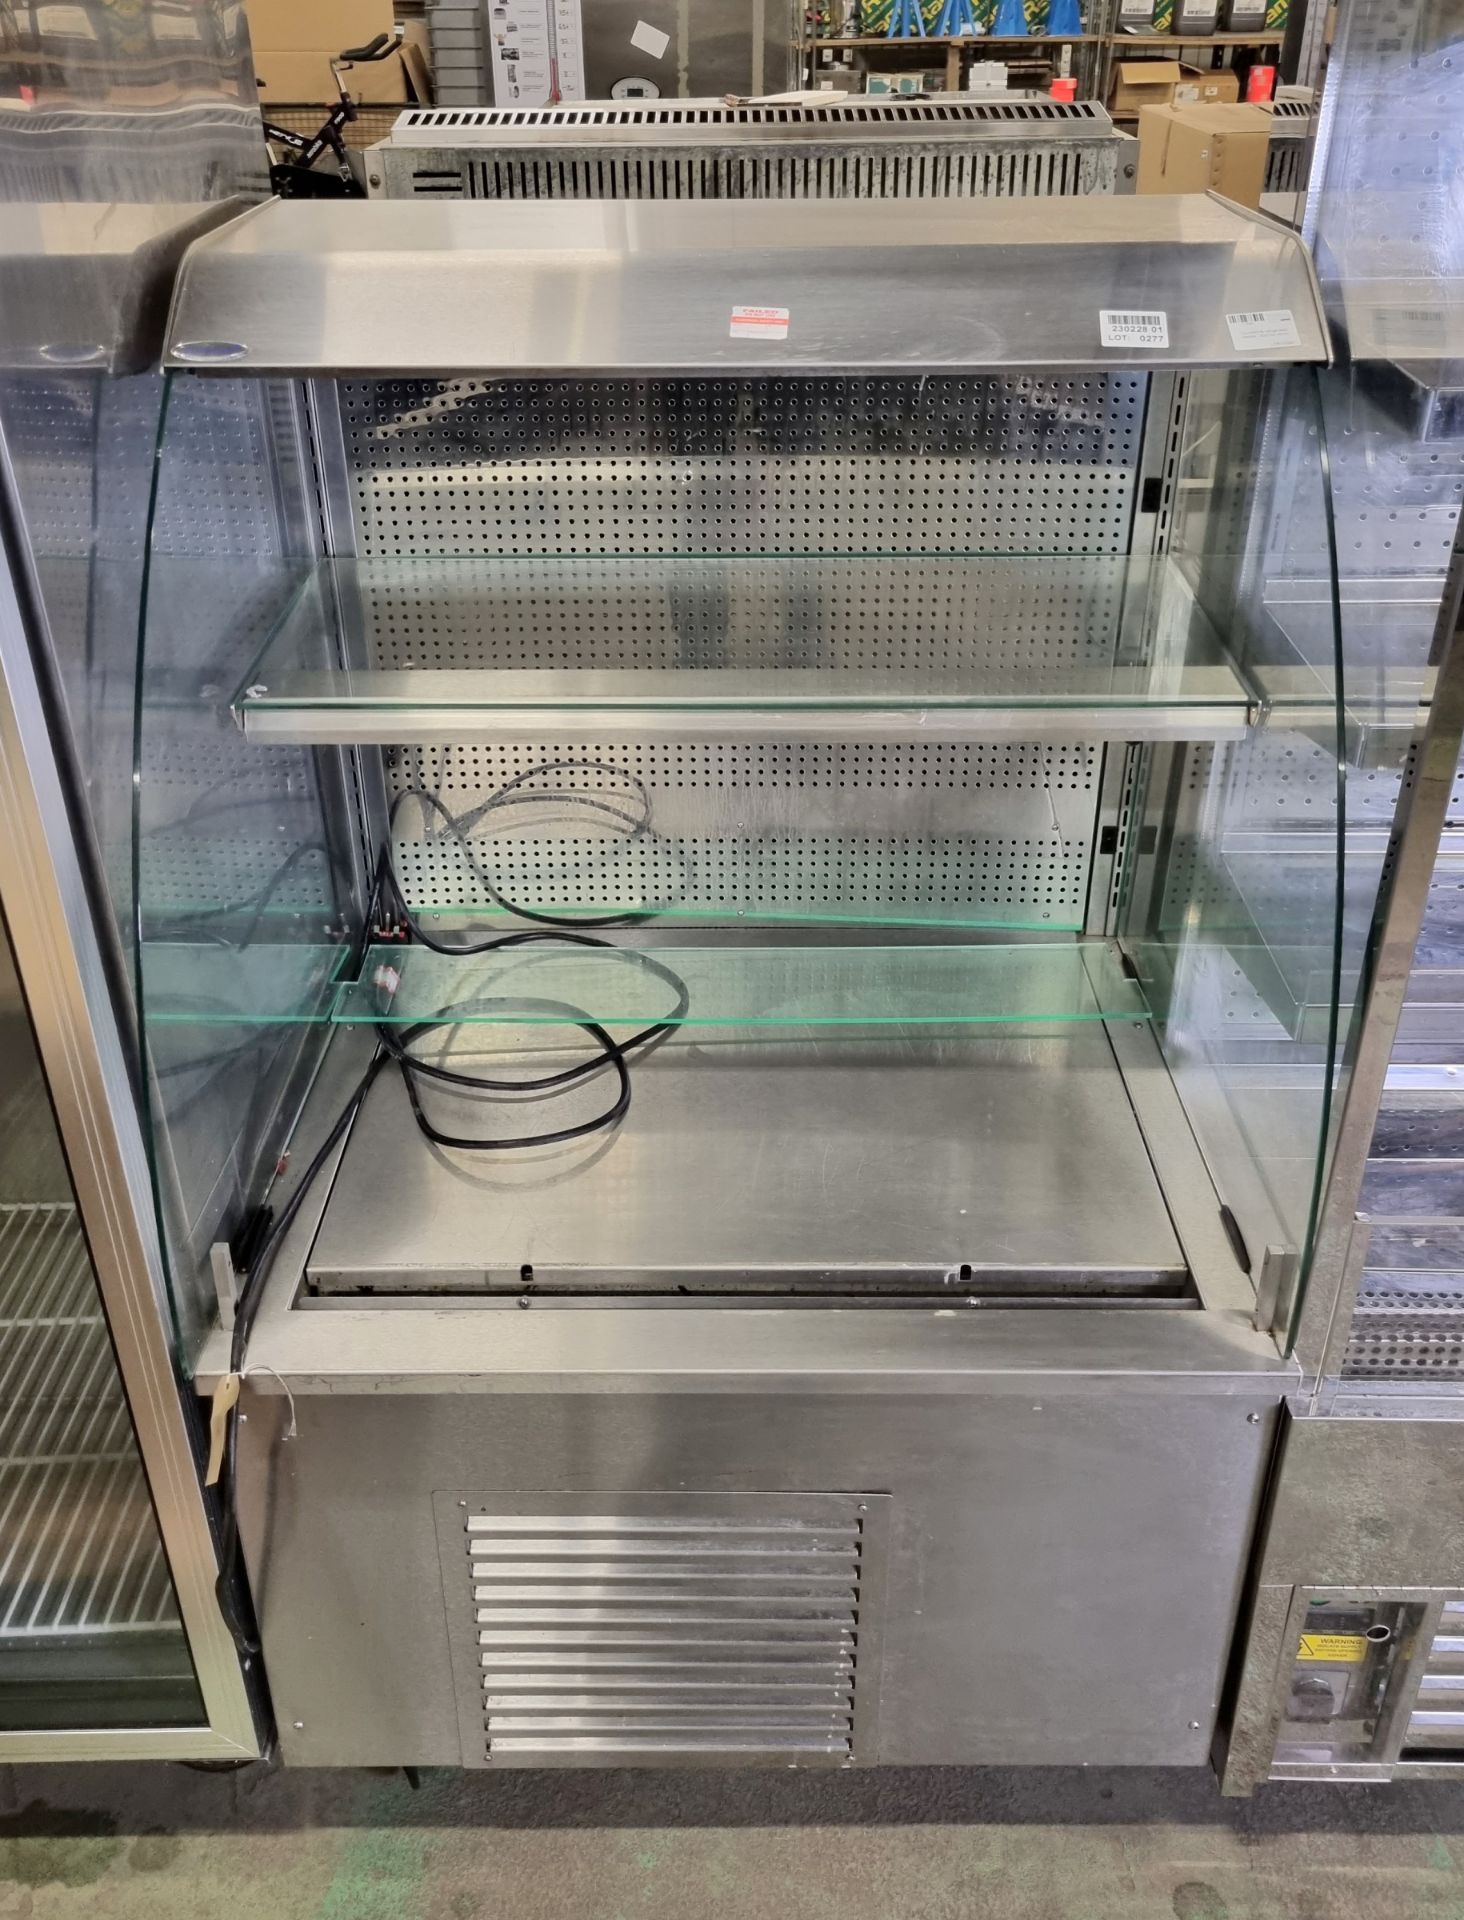 Counterline refrigerated display - 90x75x145cm - Image 2 of 3